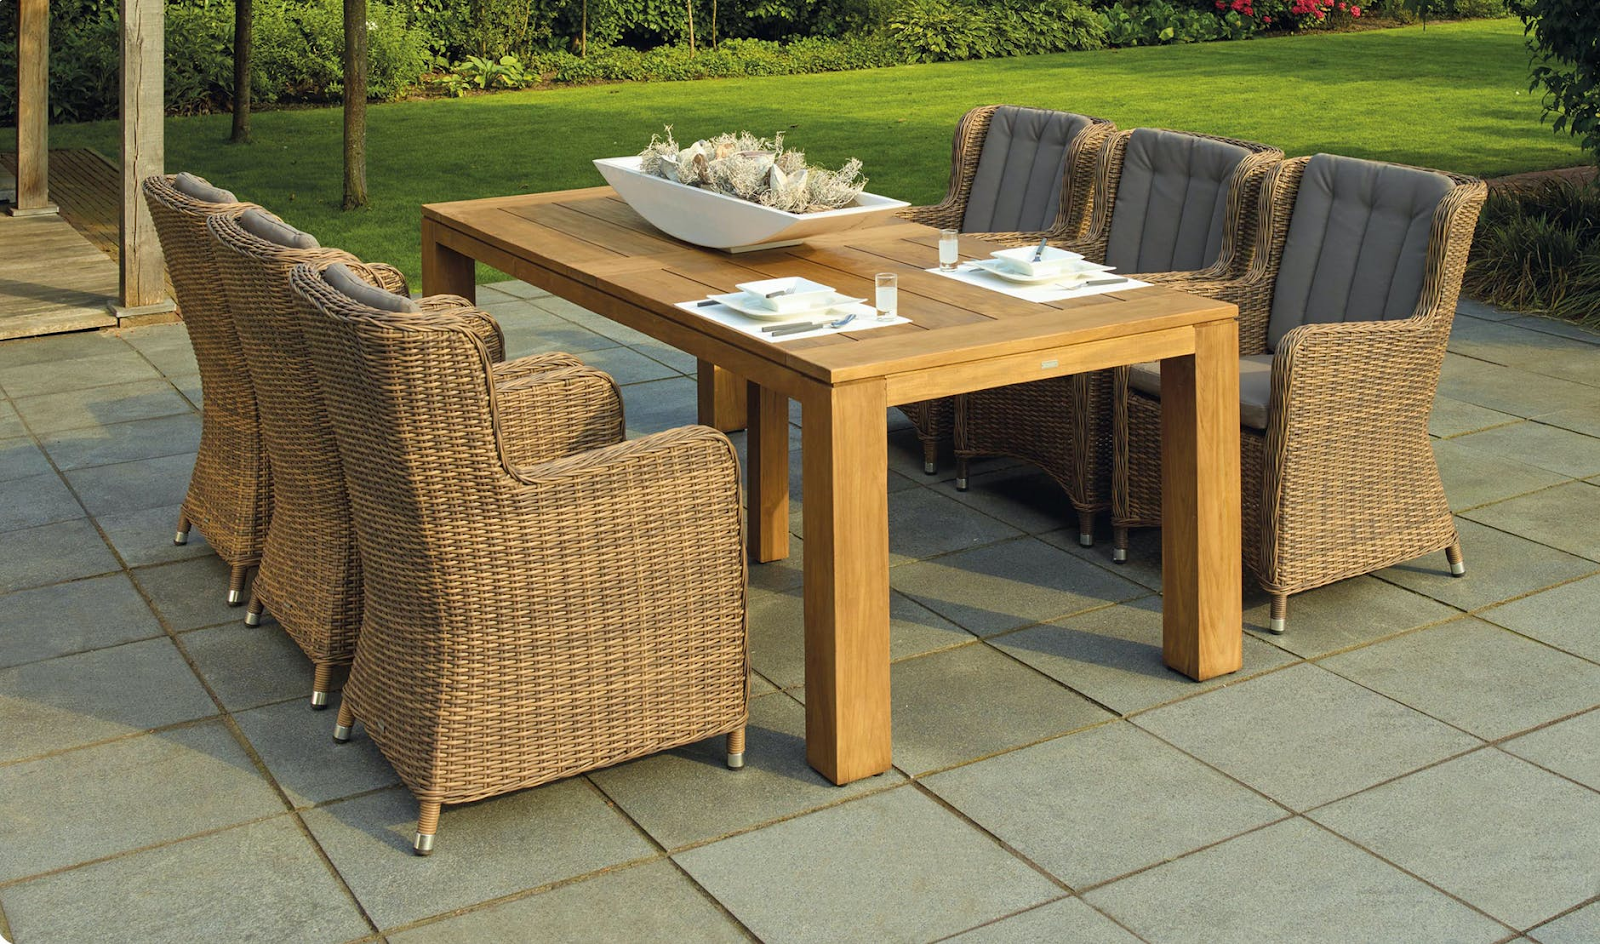 Garden seating area with wooden table and wicker chairs